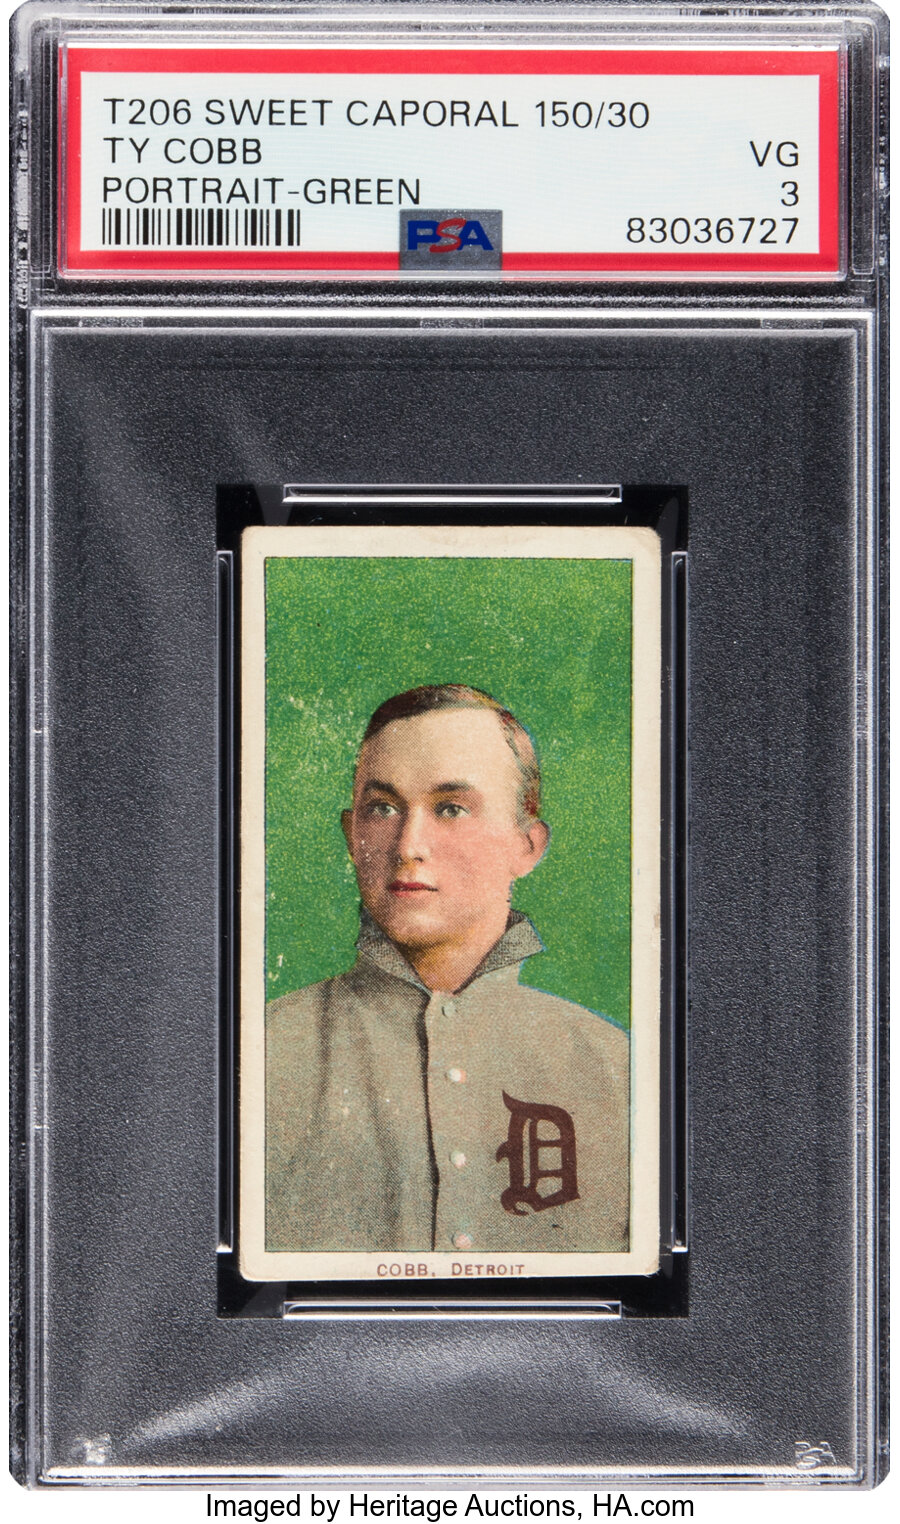 1909-11 T206 Sweet Caporal 150/30 Ty Cobb (Green Portrait) PSA VG 3 -- From The Ramsburg Collection